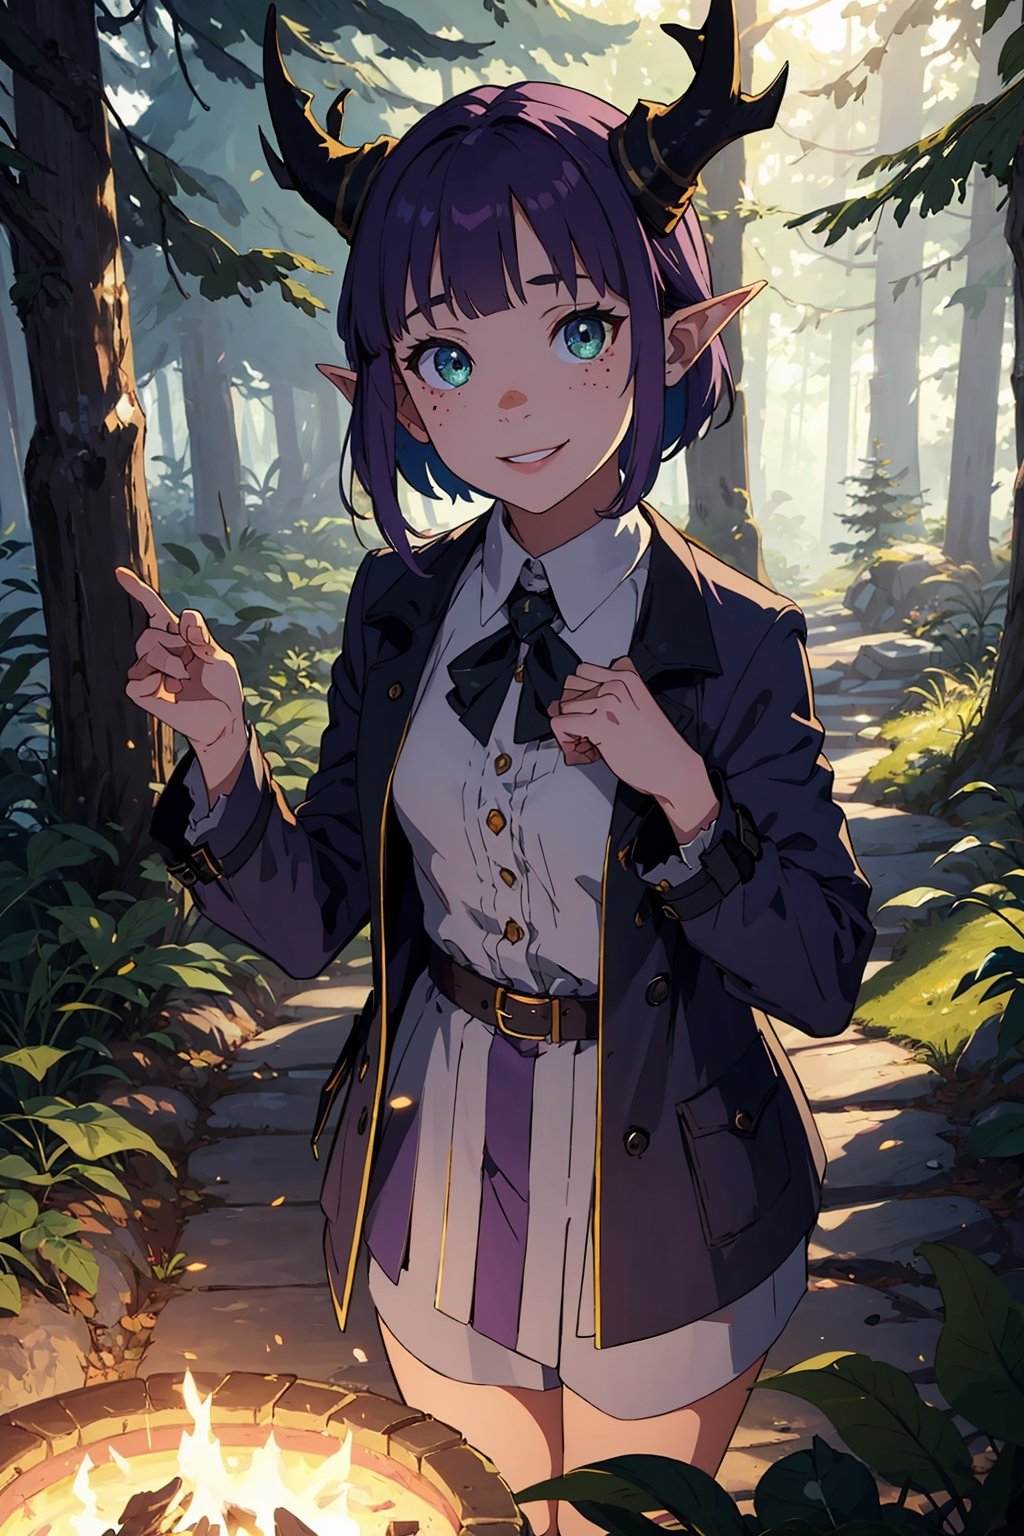 Imagine a female child with short messy vibrant purple hair in a short hair cut. She has small breasts. She has bright green eyes. She has pointed elf ears. She has two short horns on her head. She has an evil smile on her face that shows she's up to no good. She has warm freckles on her face. She wears a modest outfit with a long green trench coat with lots of pockets. She is practicing magic that sparkles around her. The background is a charming forest path in the enchanted woods with bright lighting, creating a magical ambiance. This artwork captures the essence of mischief and magic against the backdrop of a beautiful setting. detailed, detail_eyes, detailed_hair, detailed_scenario, detailed_hands, detailed_background, vox machina style,vox machina style,oil impasto, flat chest.,Kanna Kamui ,niloudef